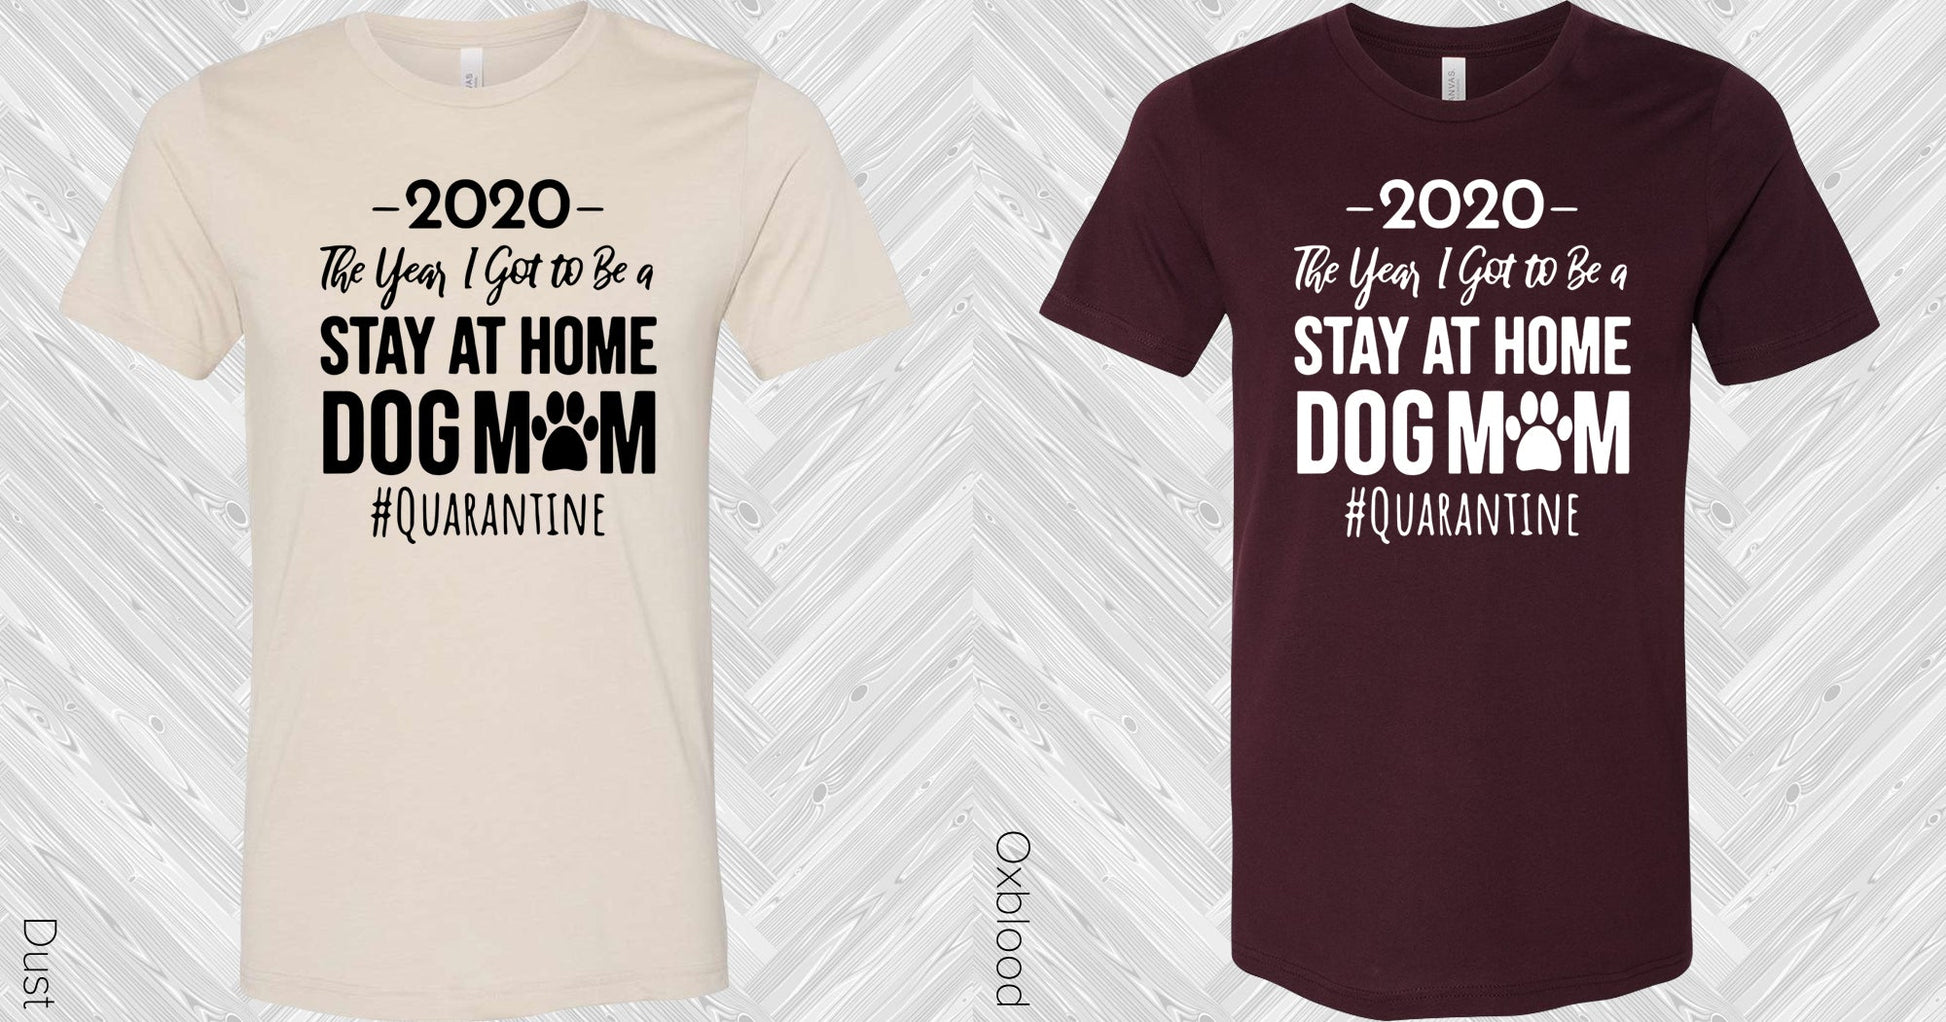 2020 The Year I Got To Be A Stay-At-Home Dog Mom #quarantine Graphic Tee Graphic Tee